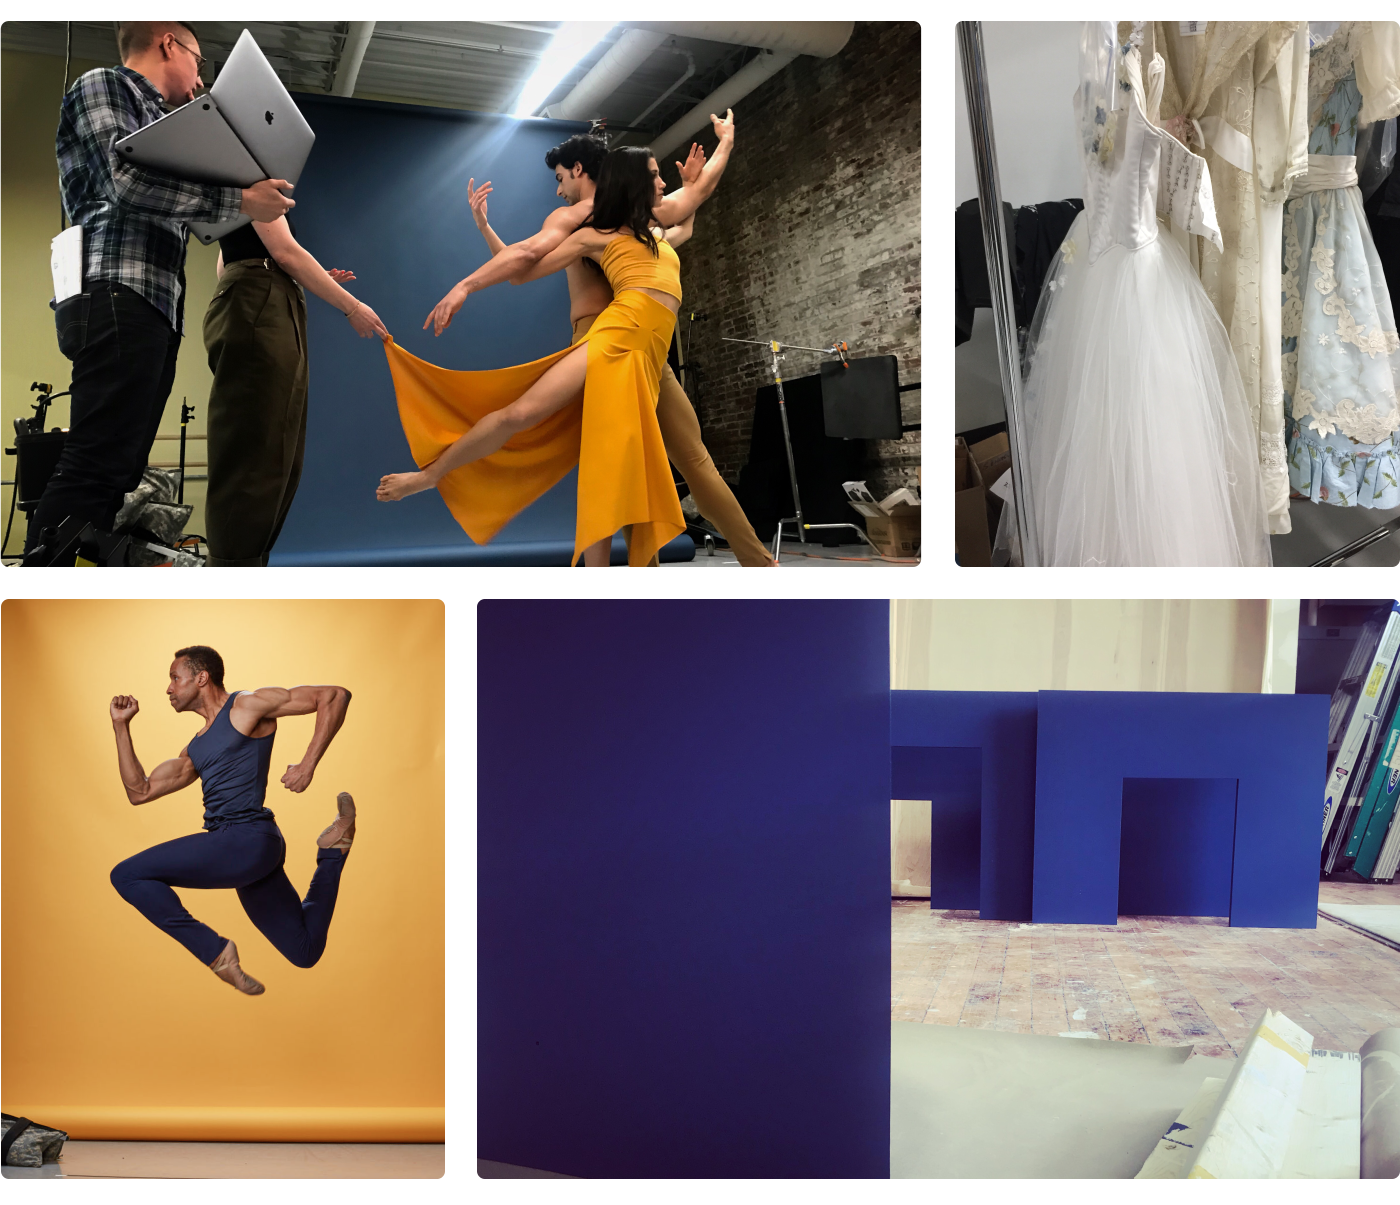 Collage of behinds the scene at the photo shoot. The first image show the creative direction team guiding the ballet dancers who are posing. The second image shows costumes waiting to be used. The third image captures a ballet dancer as he jumps in the air creating a dramatic pose. The last image features the backdrop and scenery pieces in a deep blue color.